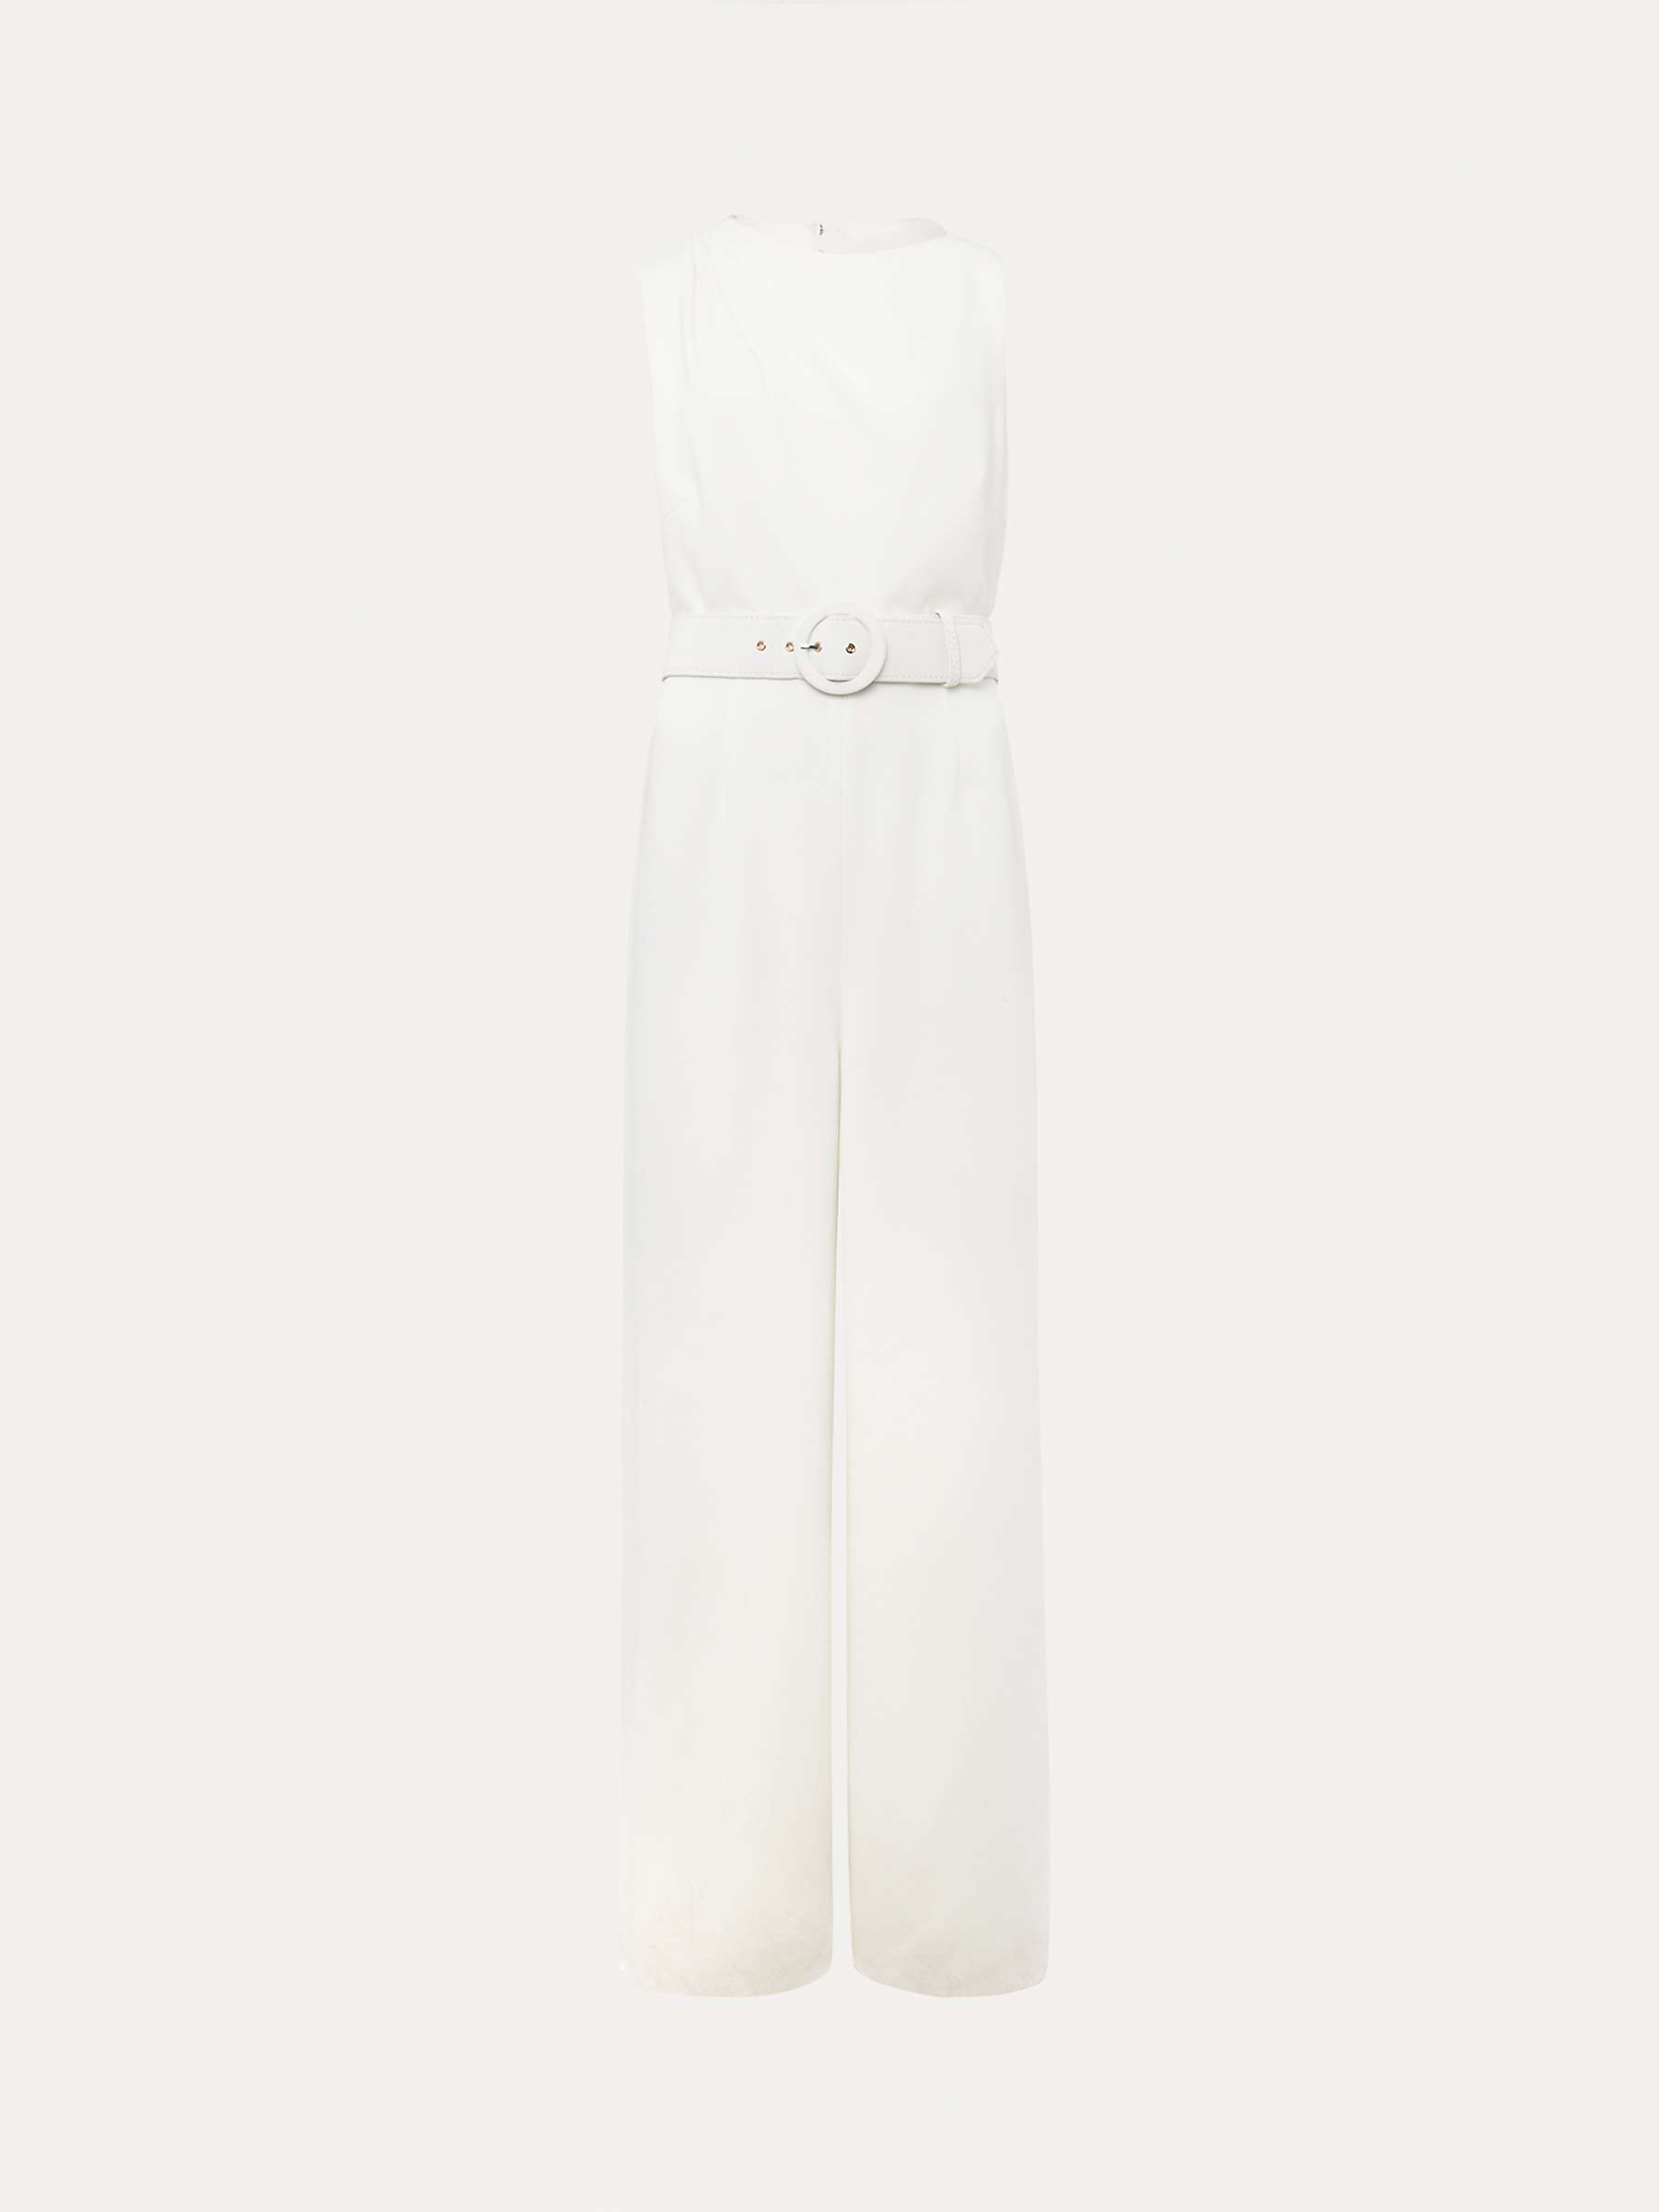 Phase Eight Gracie Wide Leg Jumpsuit, Ivory at John Lewis & Partners